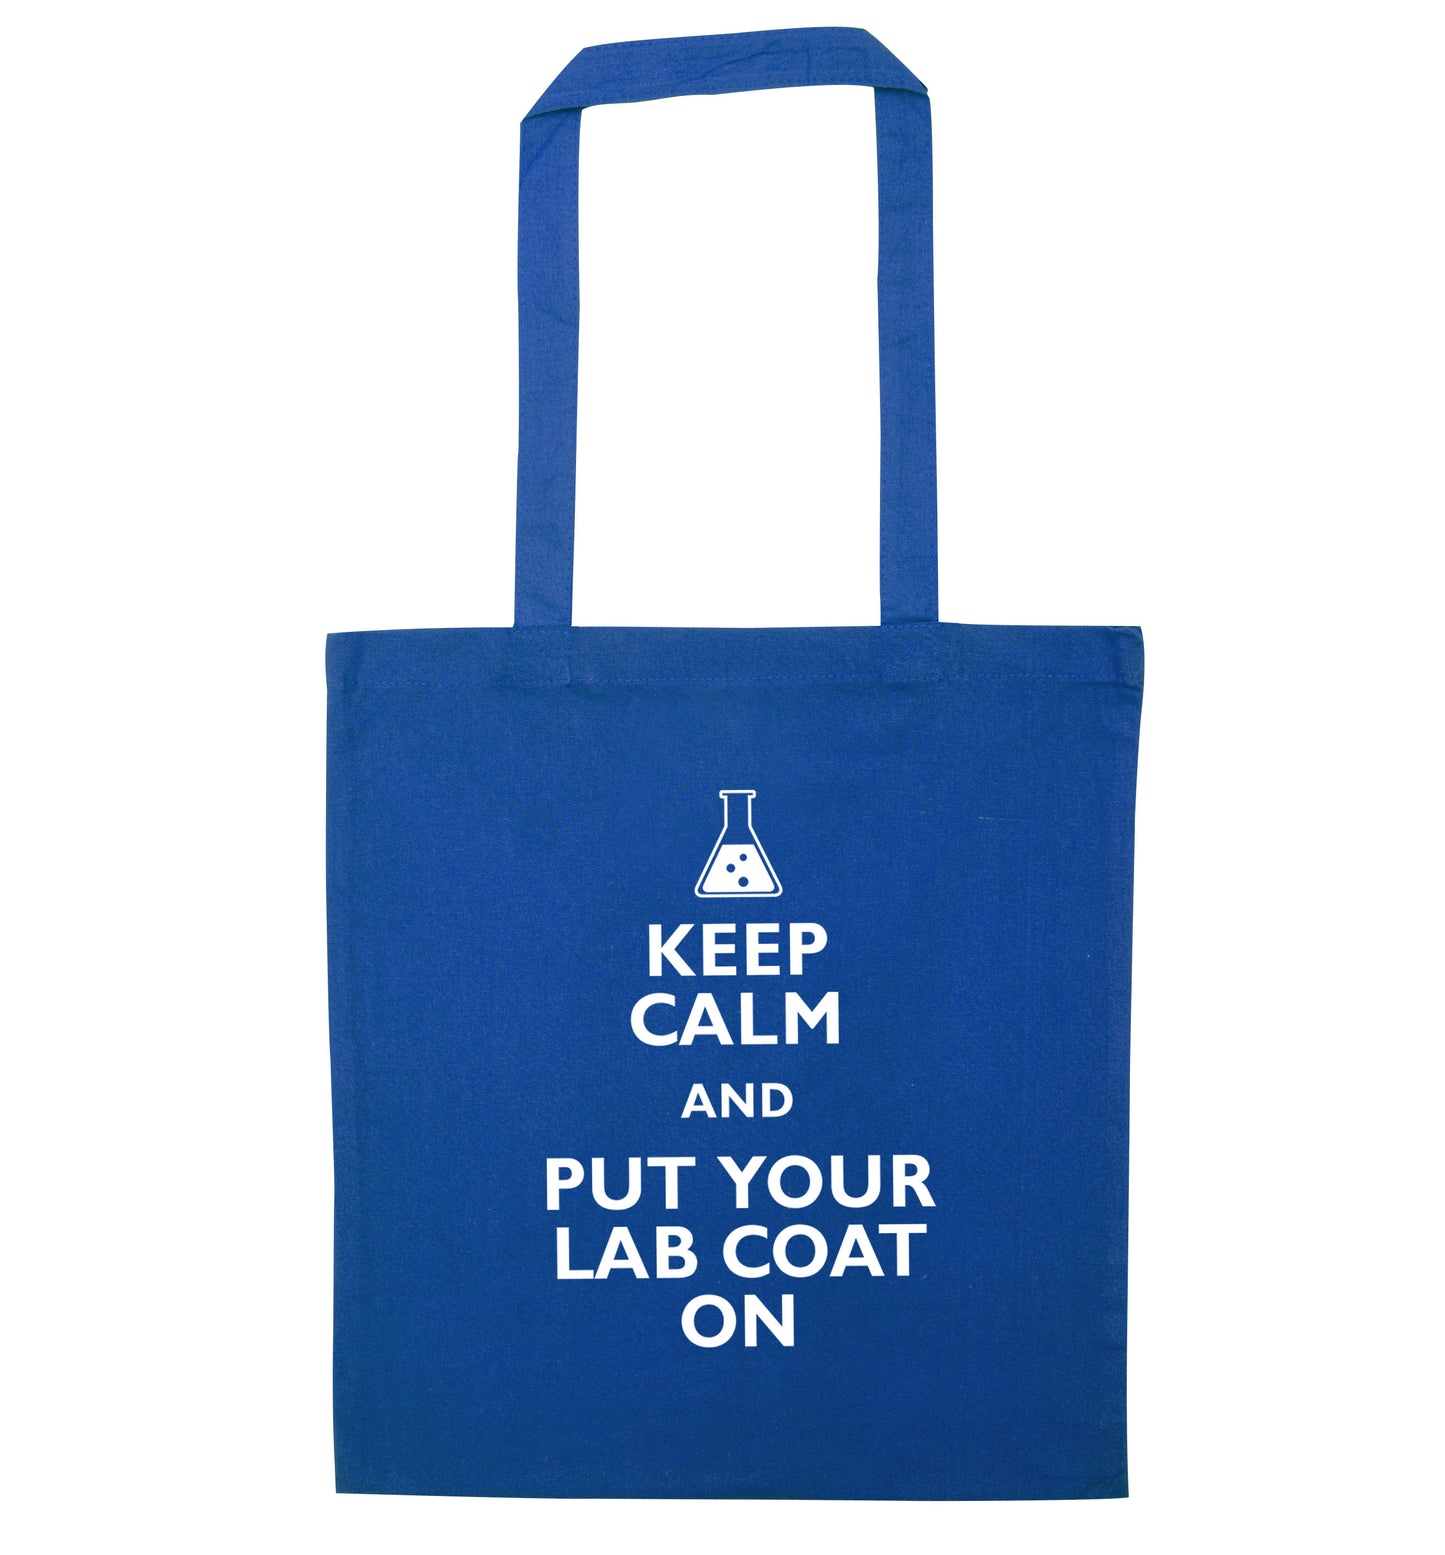 Keep calm and put your lab coat on blue tote bag